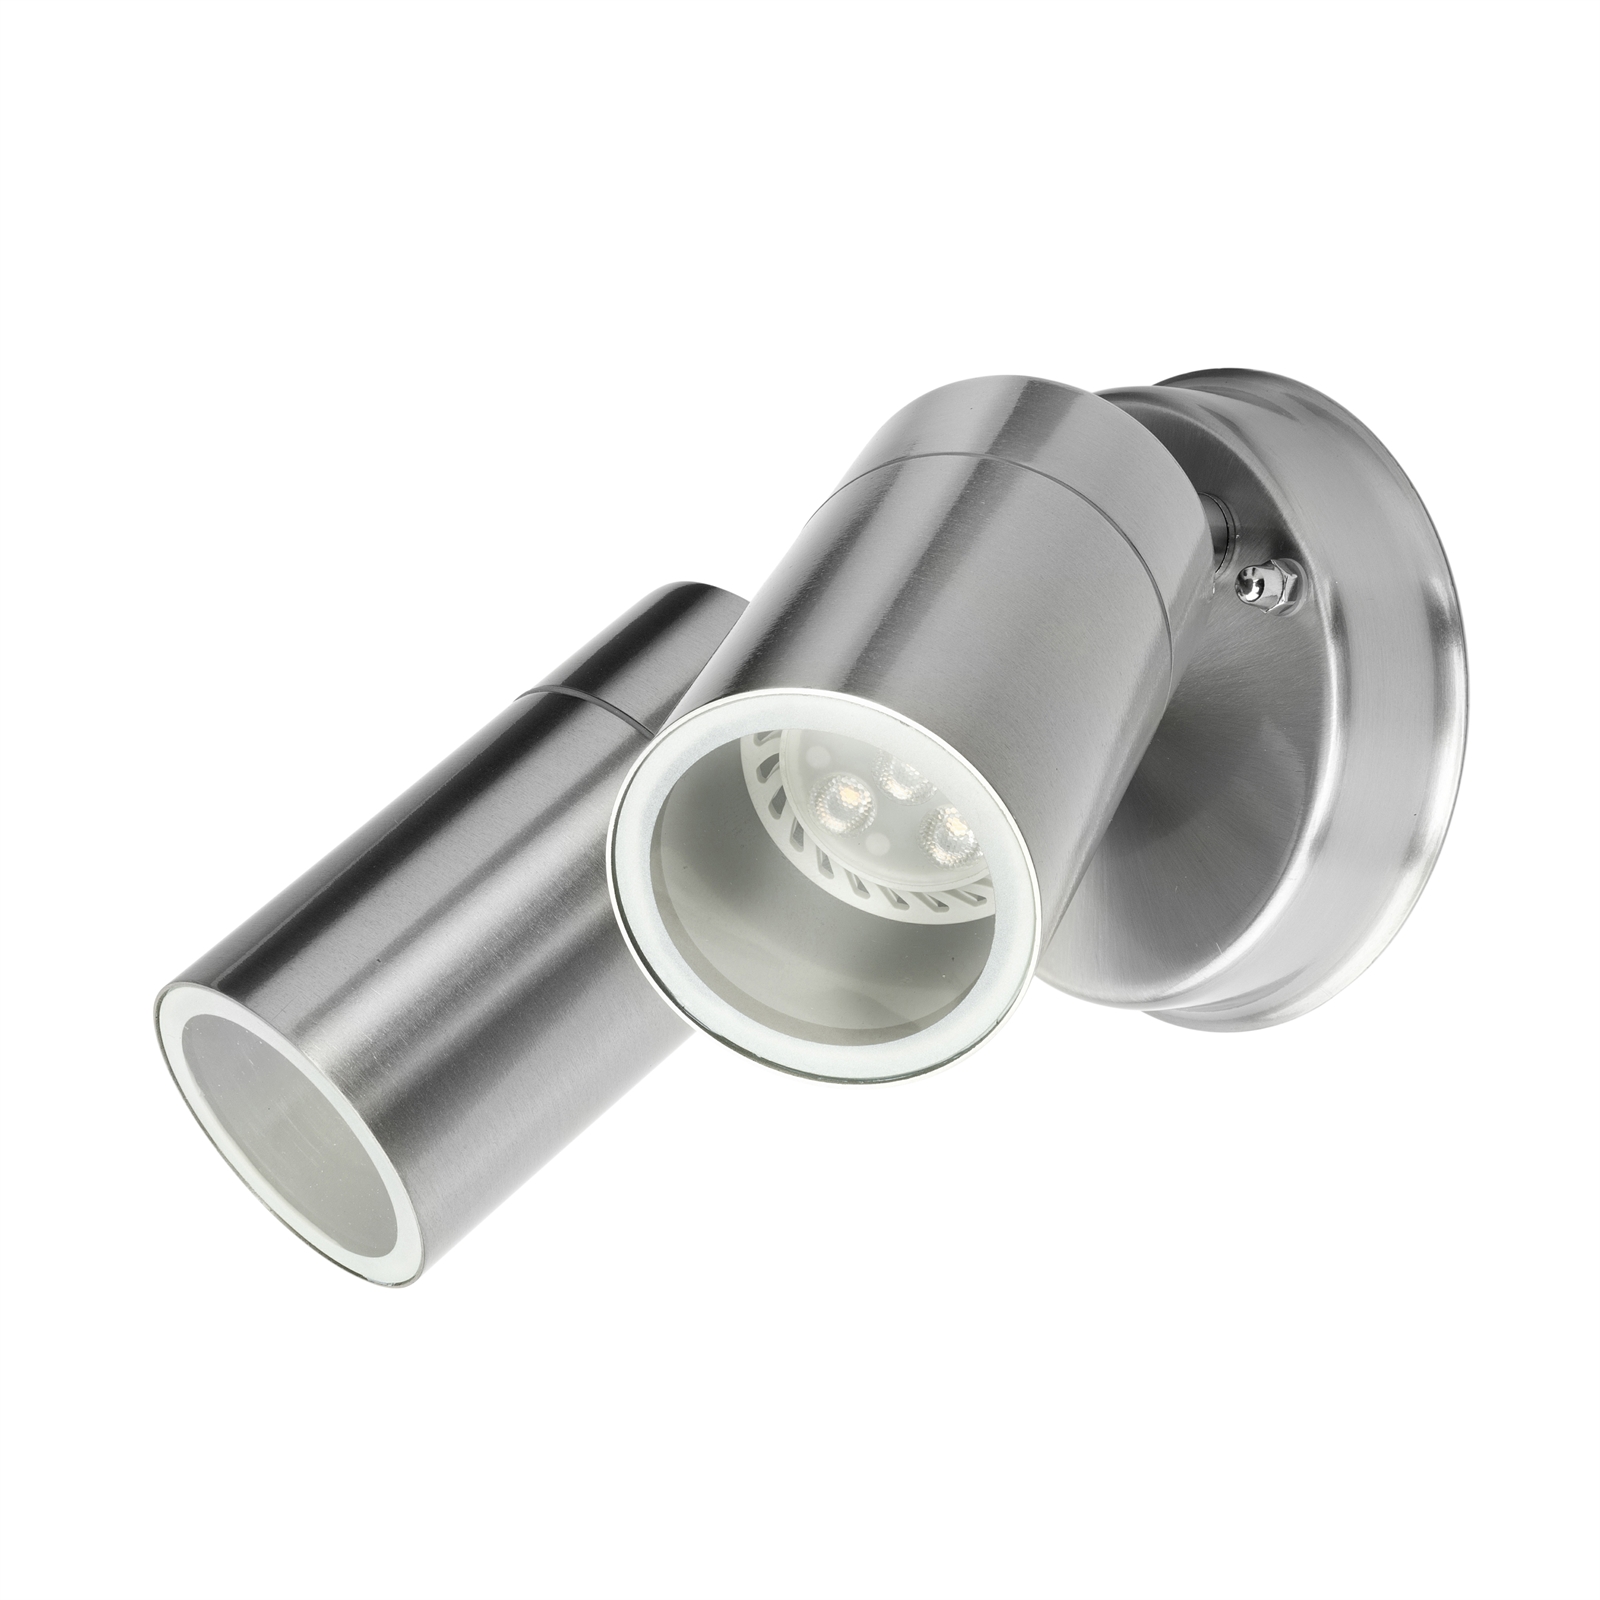 Brilliant Lighting Coolum Stainless Steel Twin Head Exterior Wall Lights